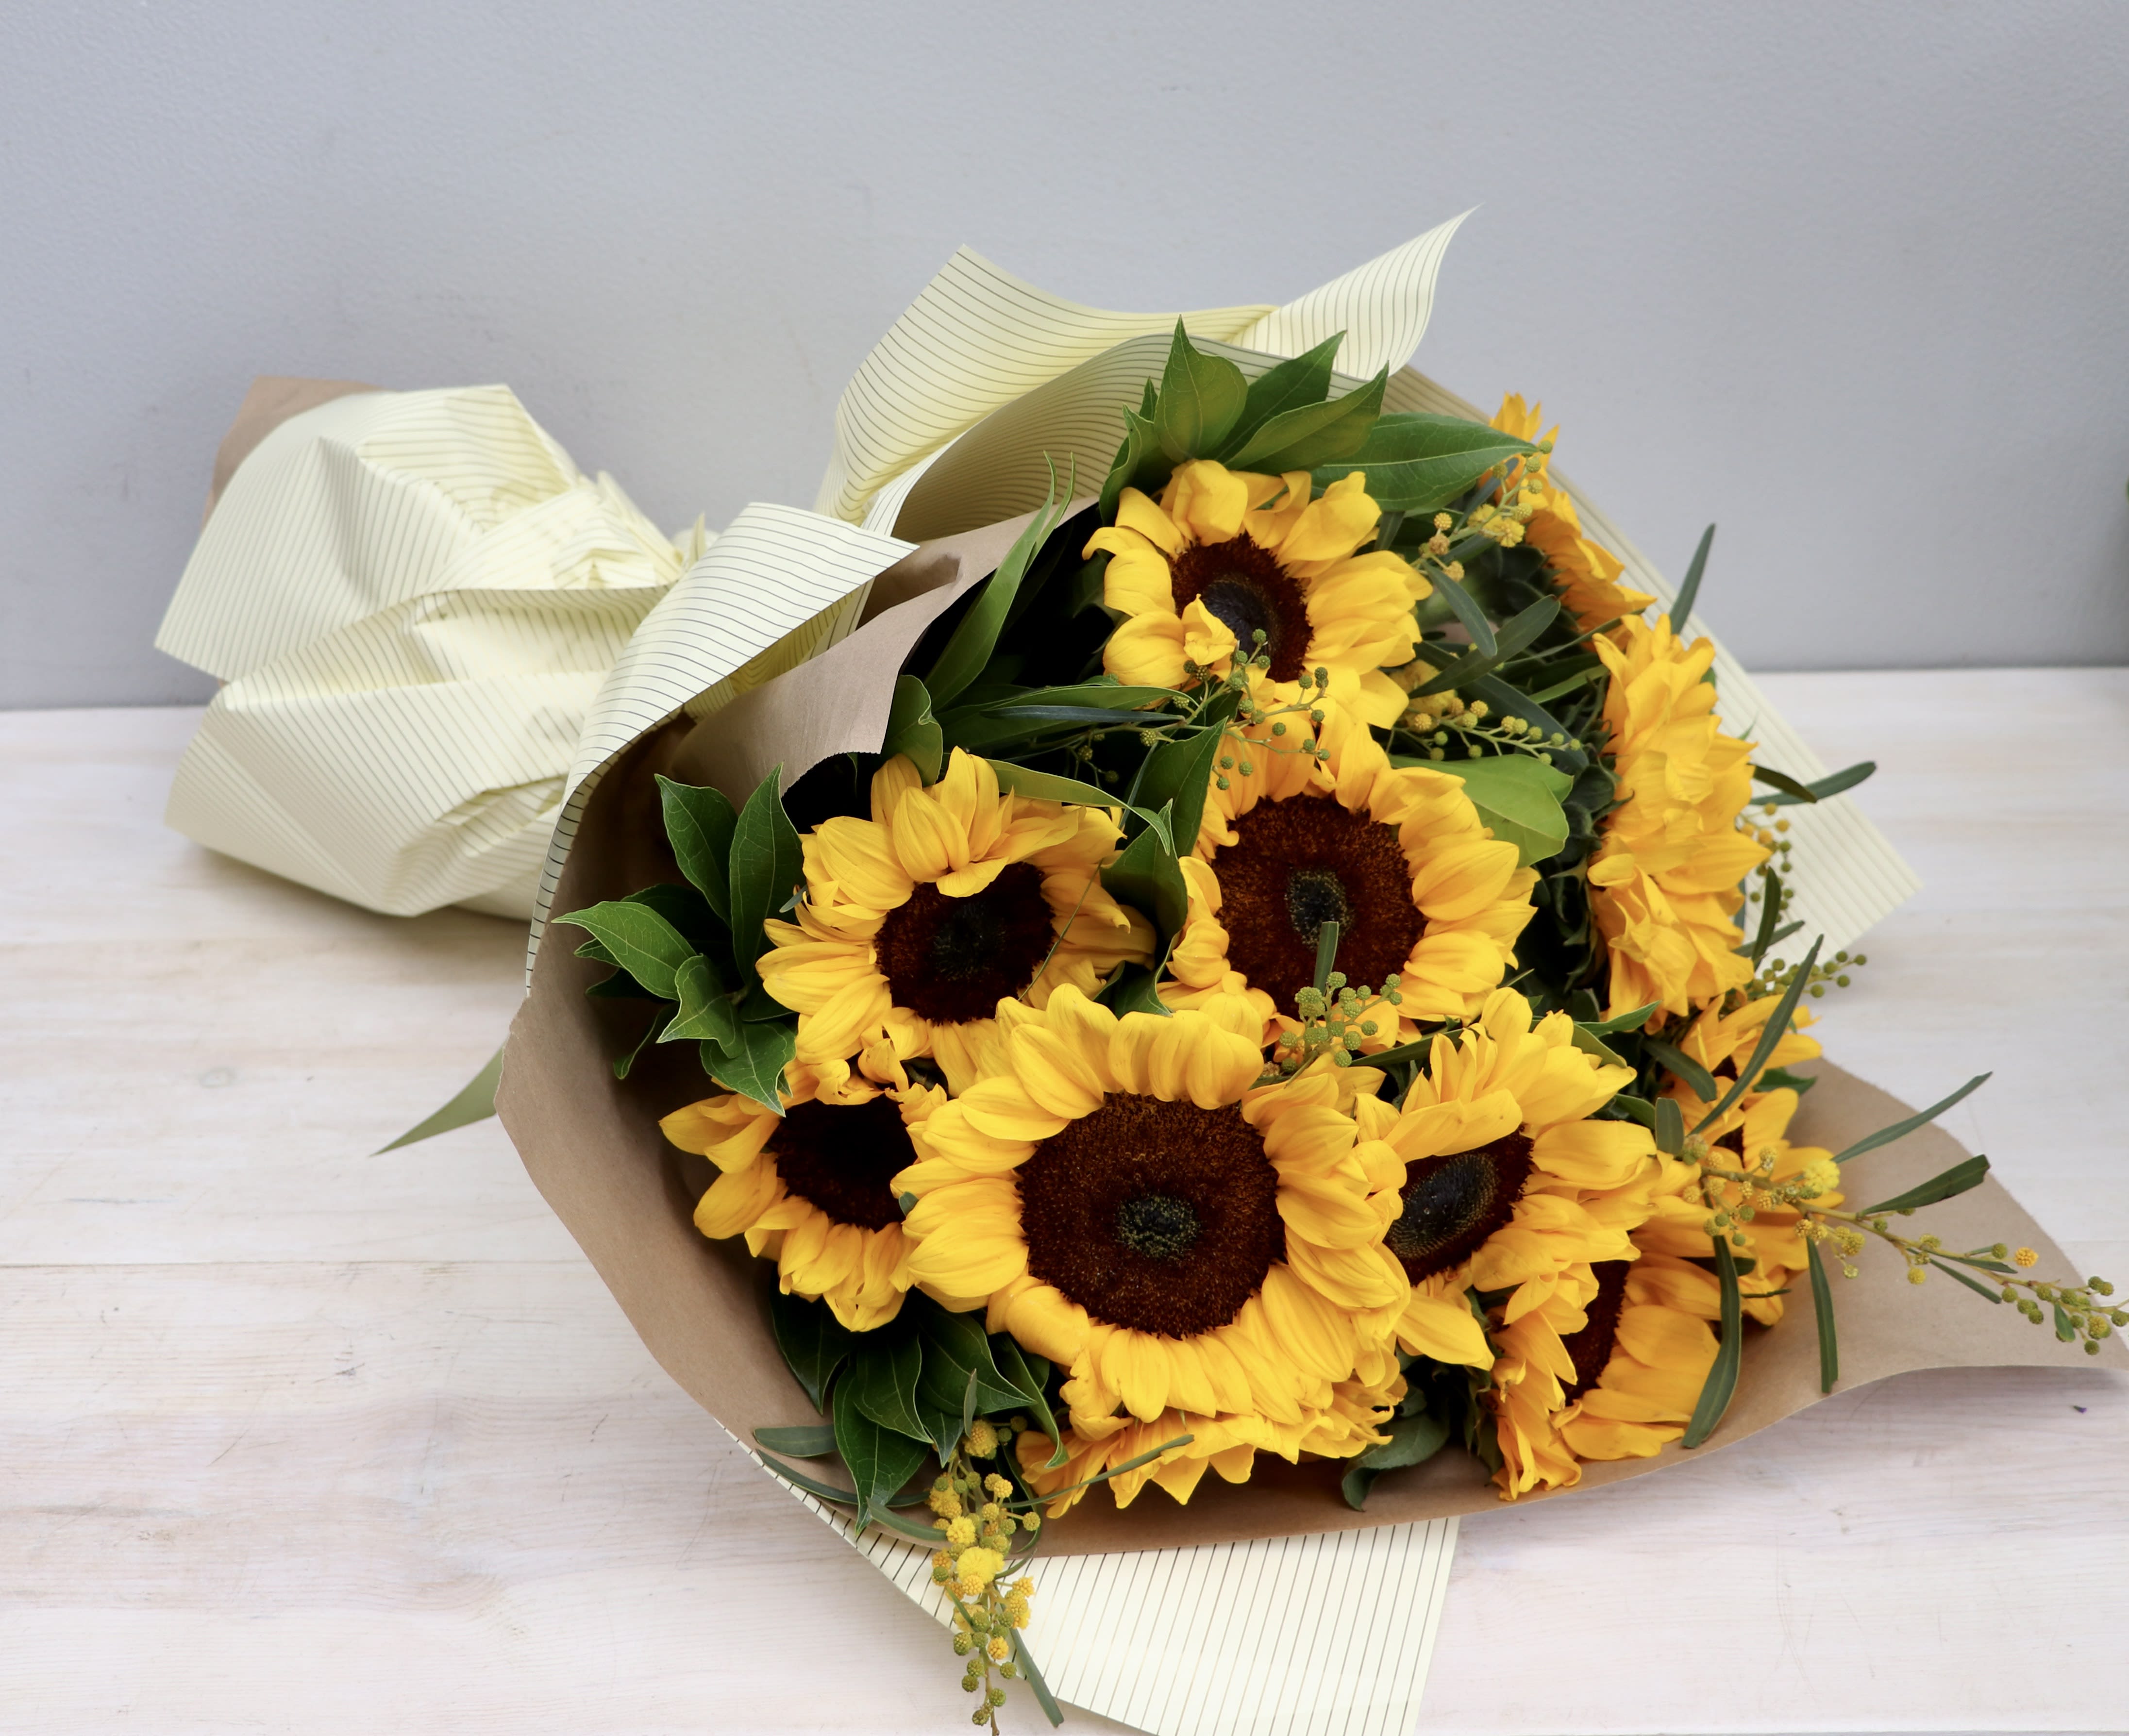 Sunflower Bouquet - My Glendale Florist  - The standard size is 12 sunflowers. All bouquets are only available for pick up. We will confirm when order is ready for pickup.